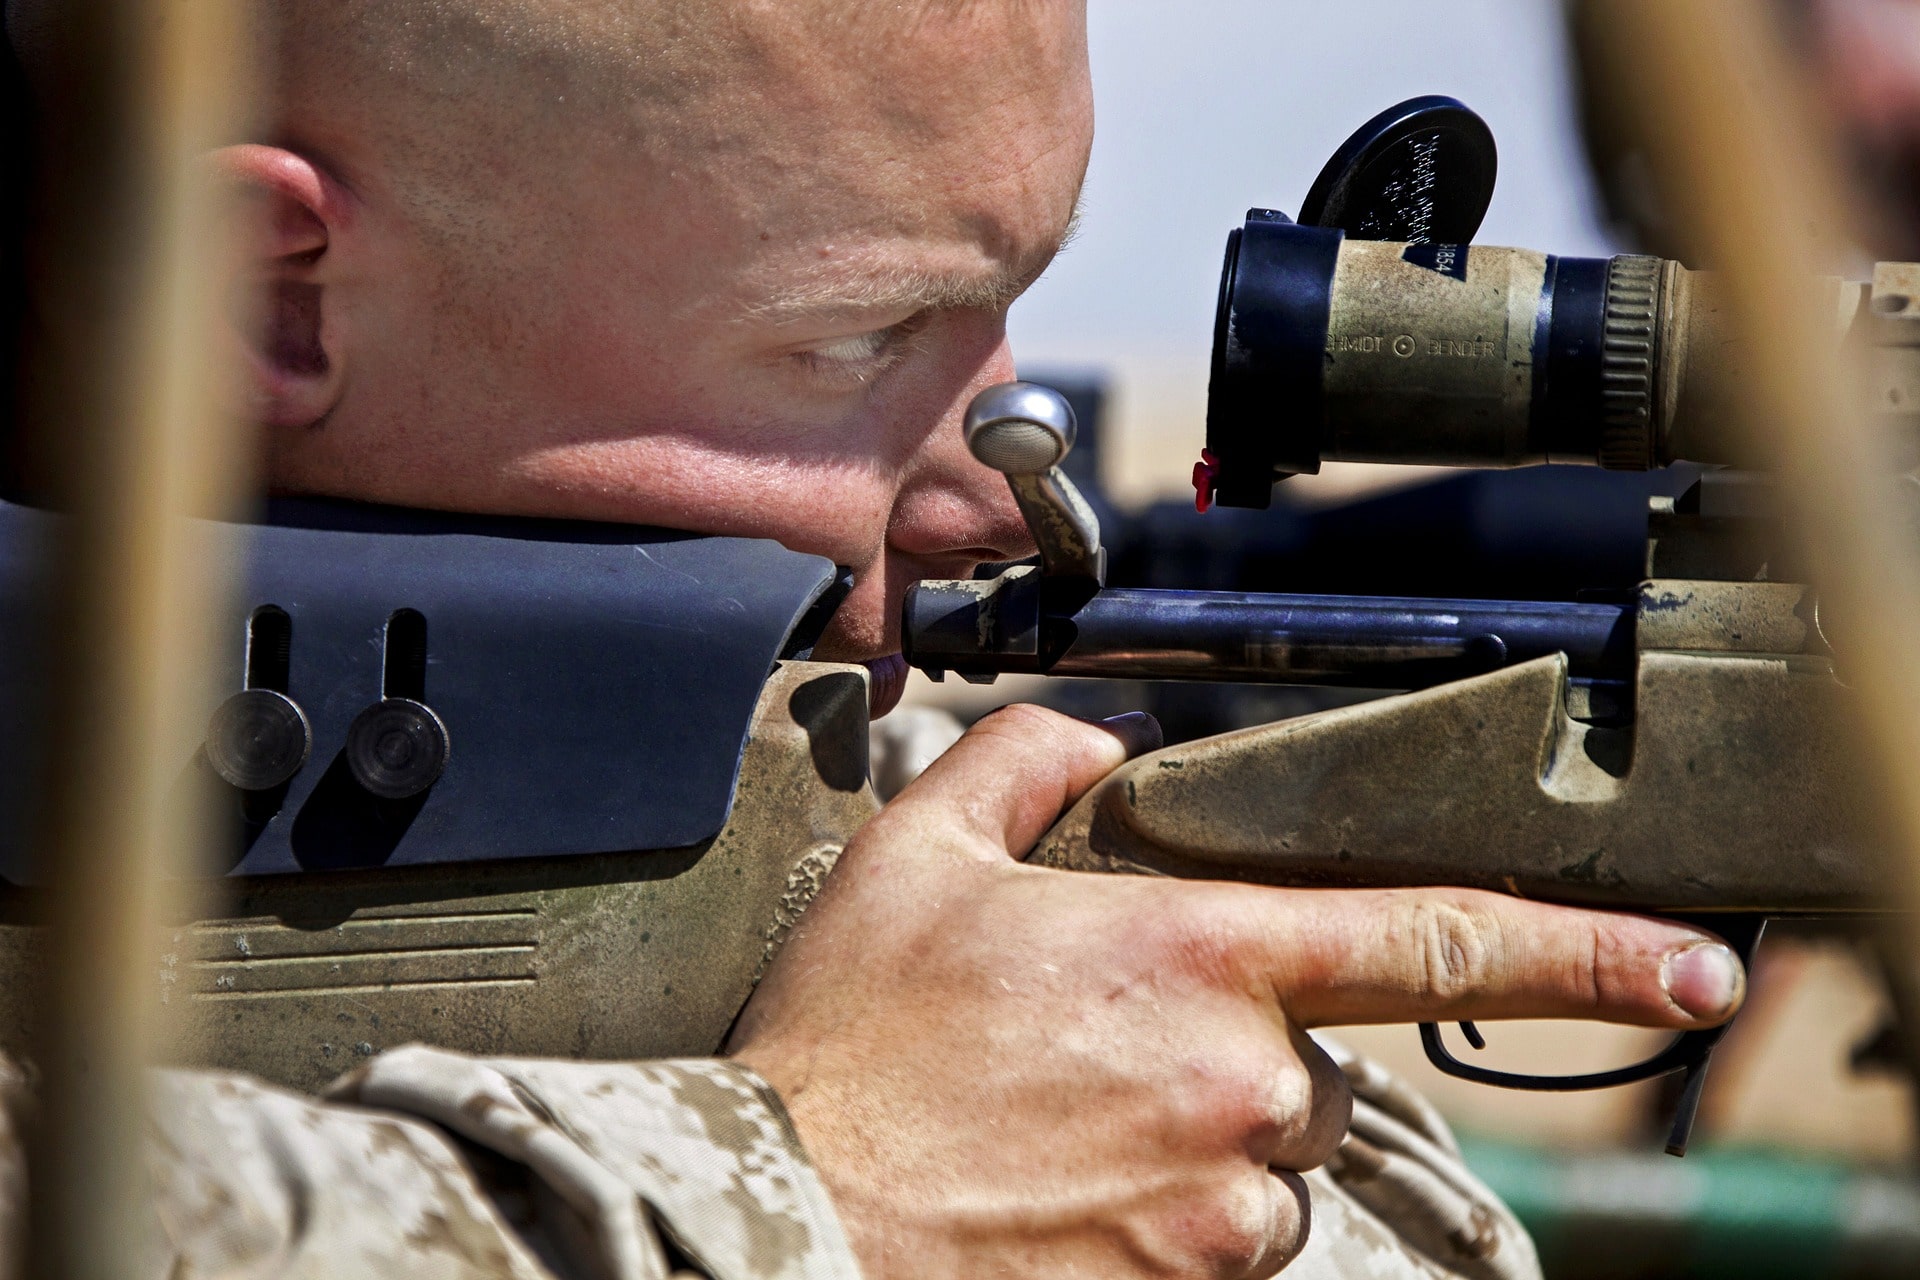 soldier aiming with a sniper rifle